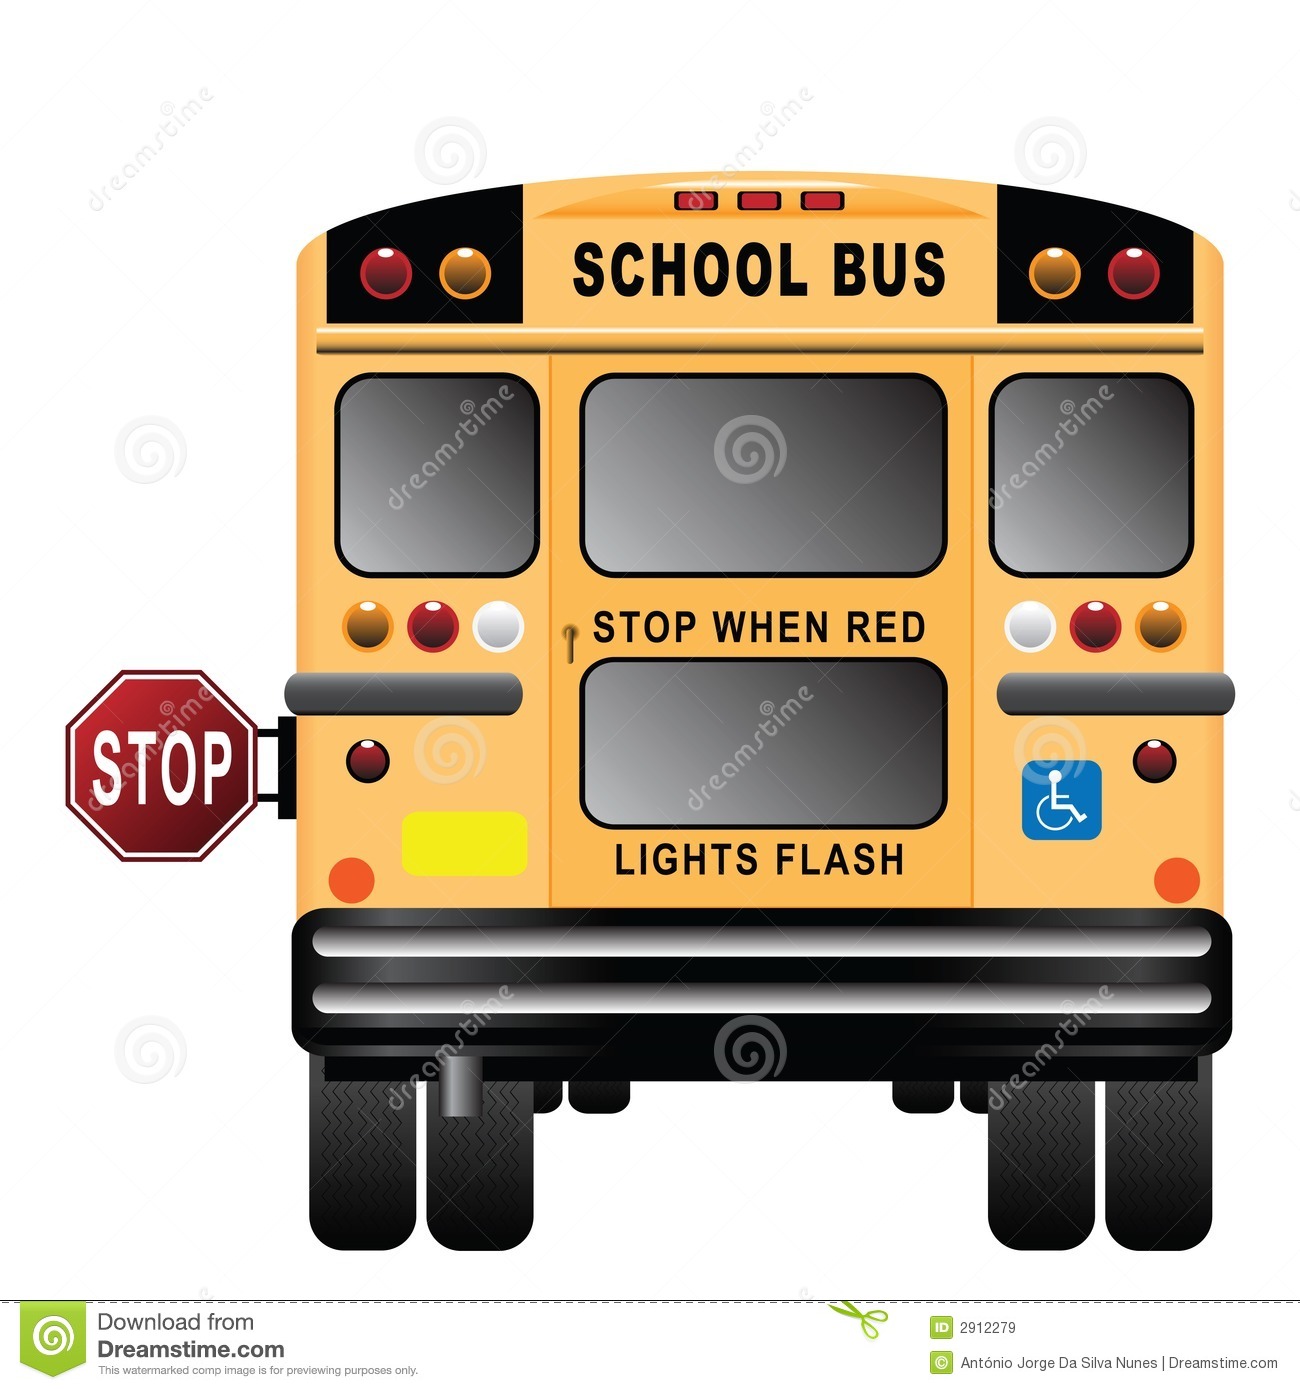 School Bus Royalty Free Stock Images   Image  2912279